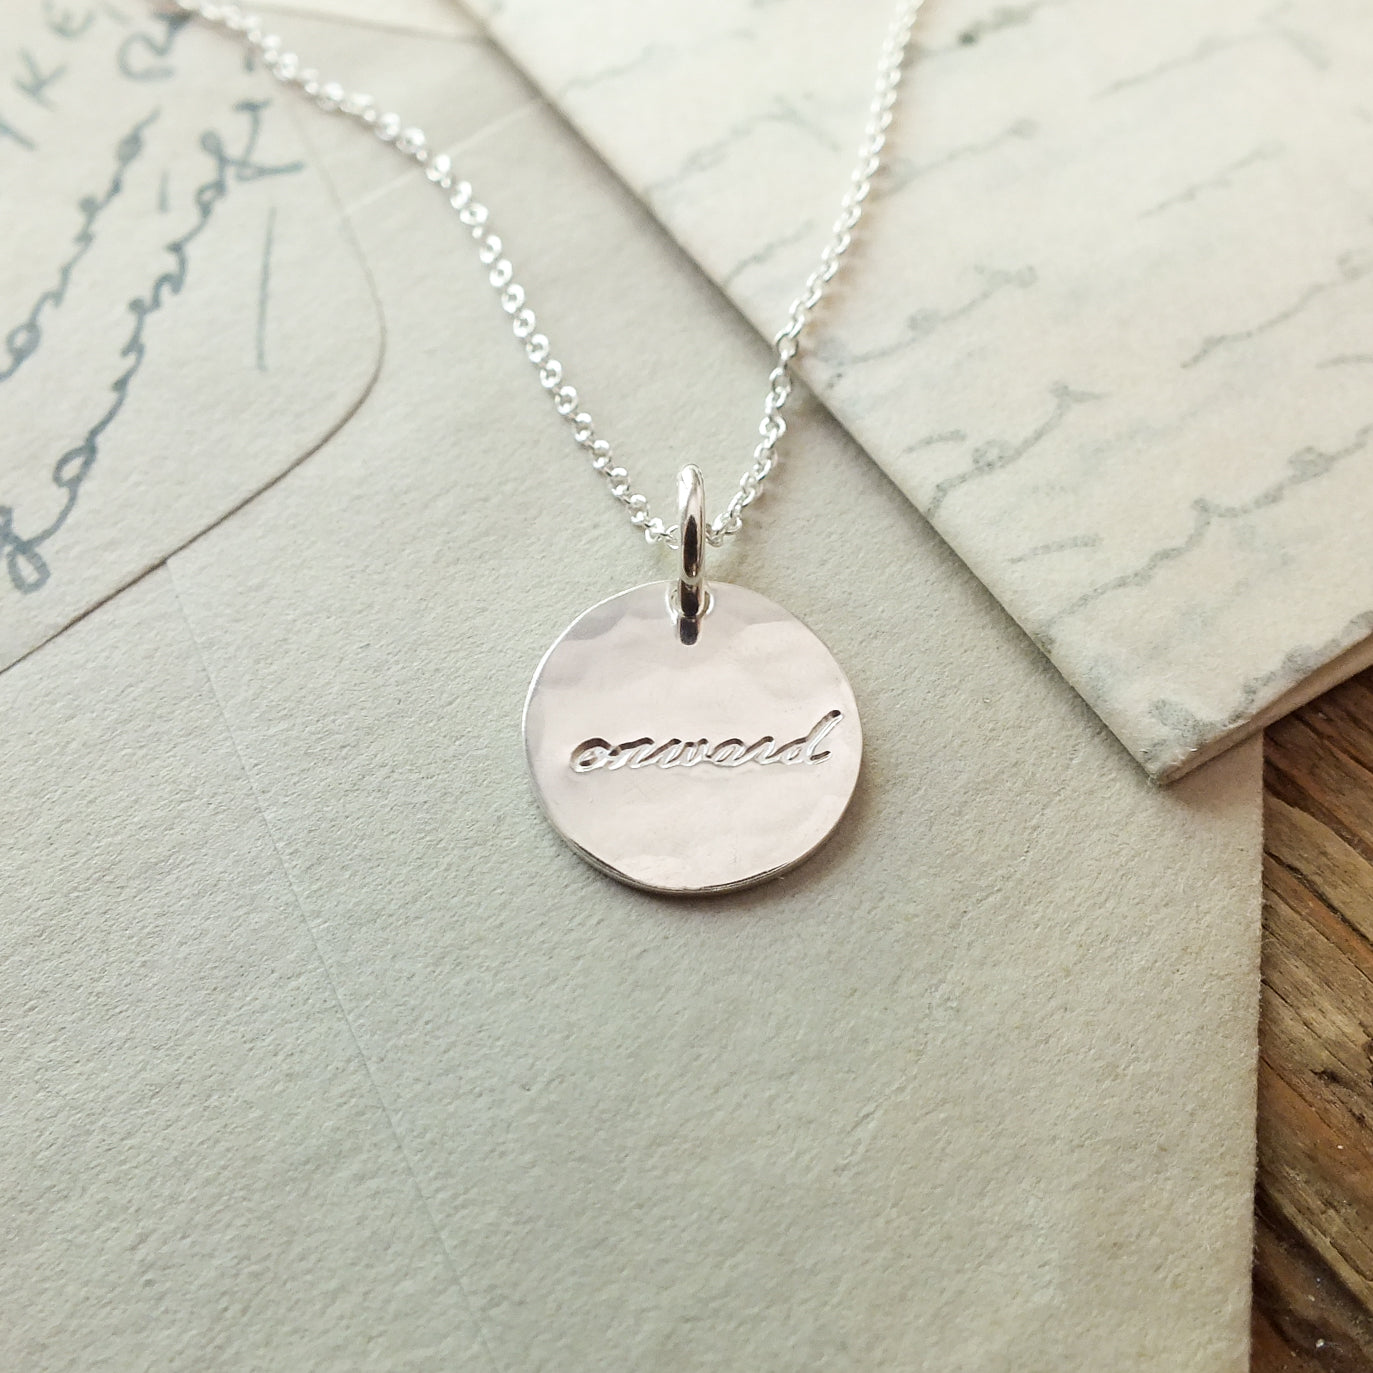 Circular Onward Necklace by Becoming Jewelry on a wooden surface with handwritten letters in the background.